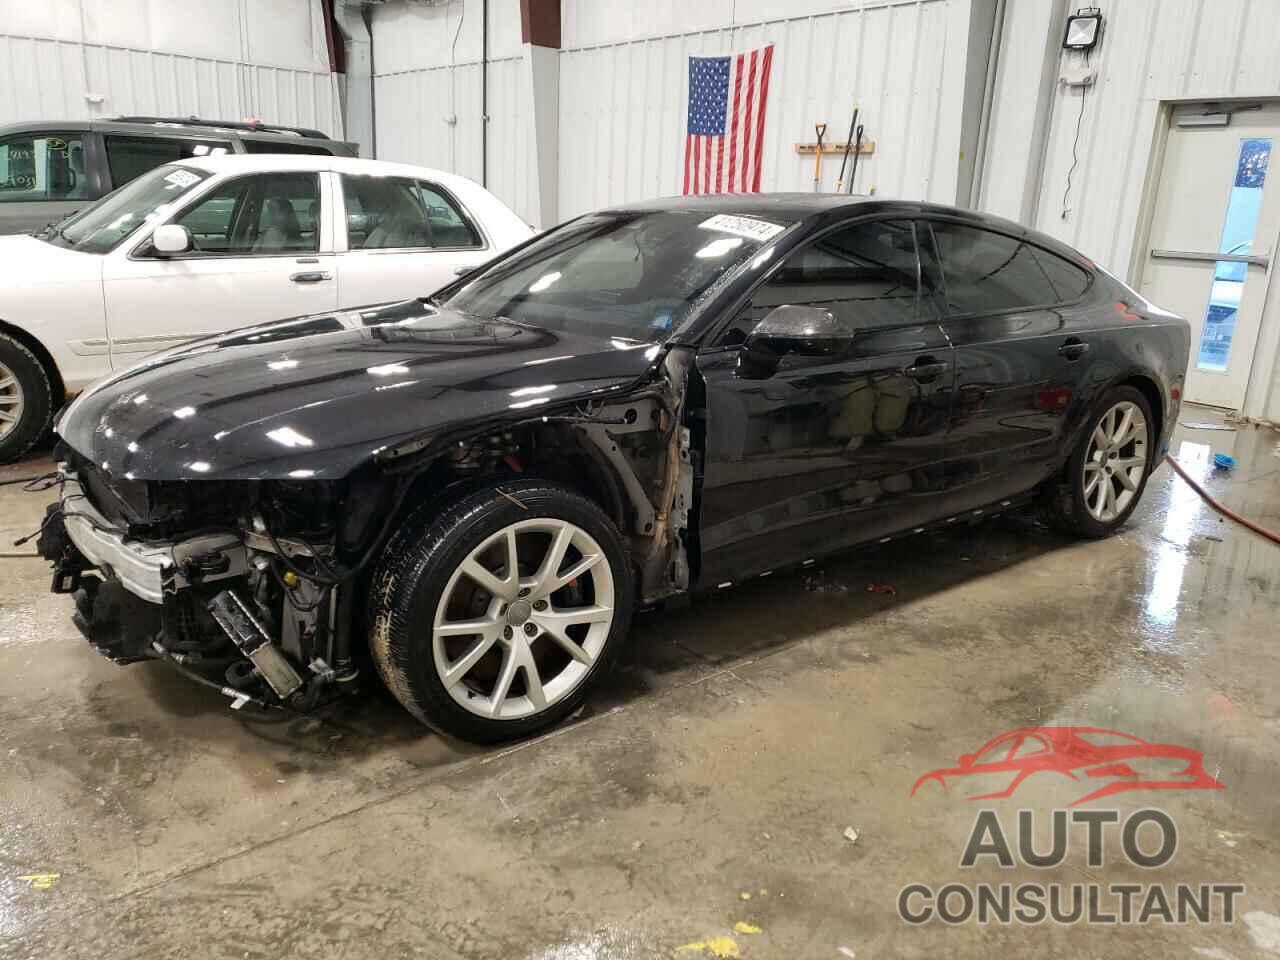 AUDI S7/RS7 2016 - WUAW2AFC0GN903129